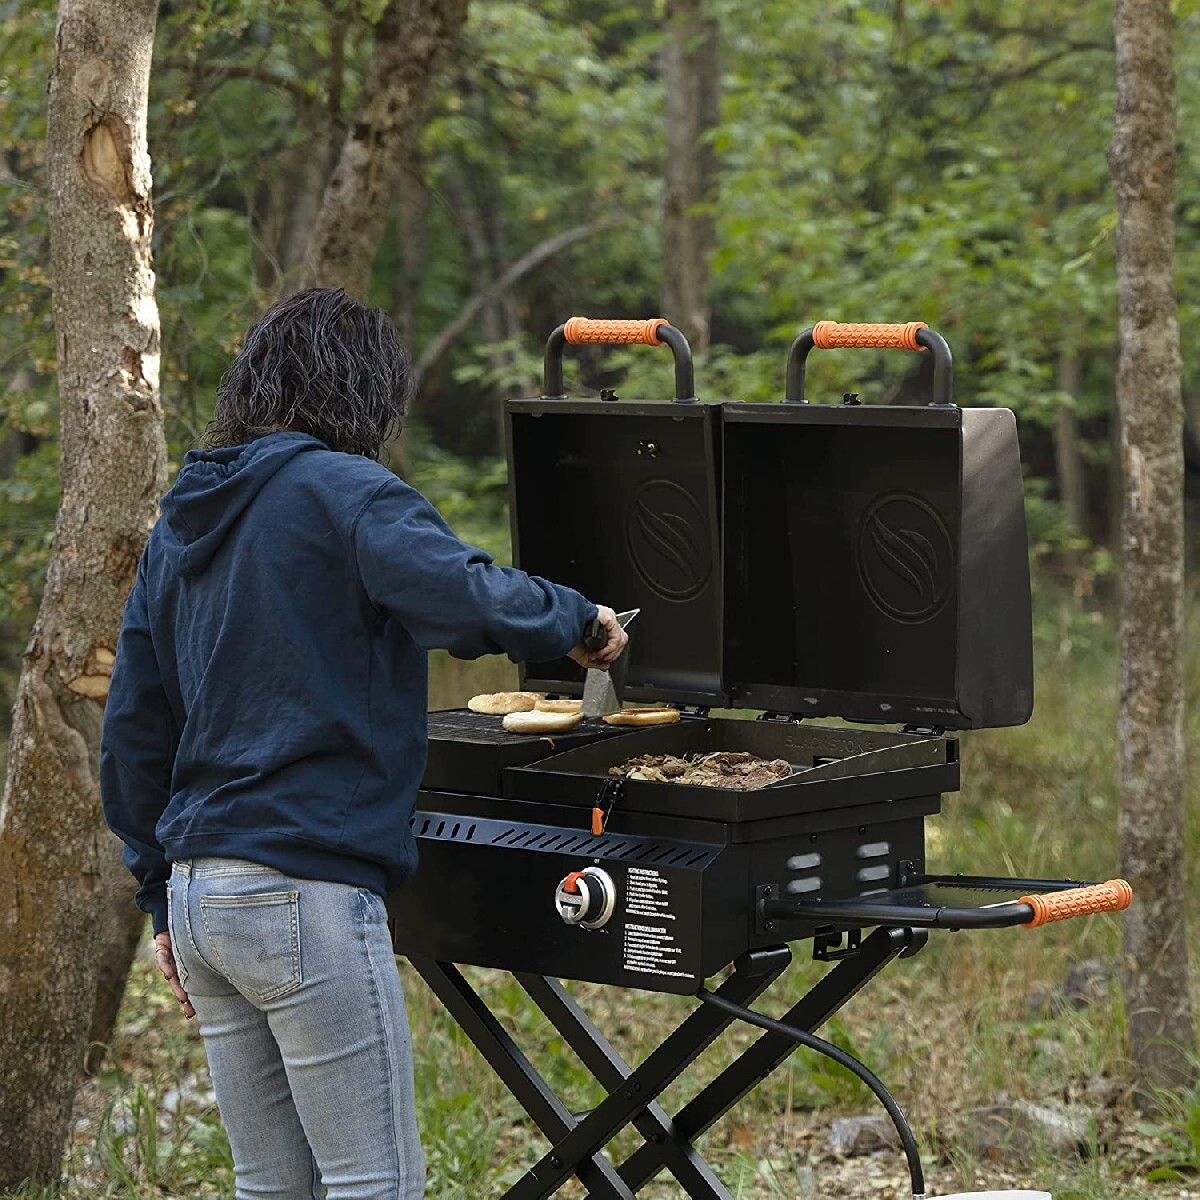 Portable Barbecue Griddle Grill